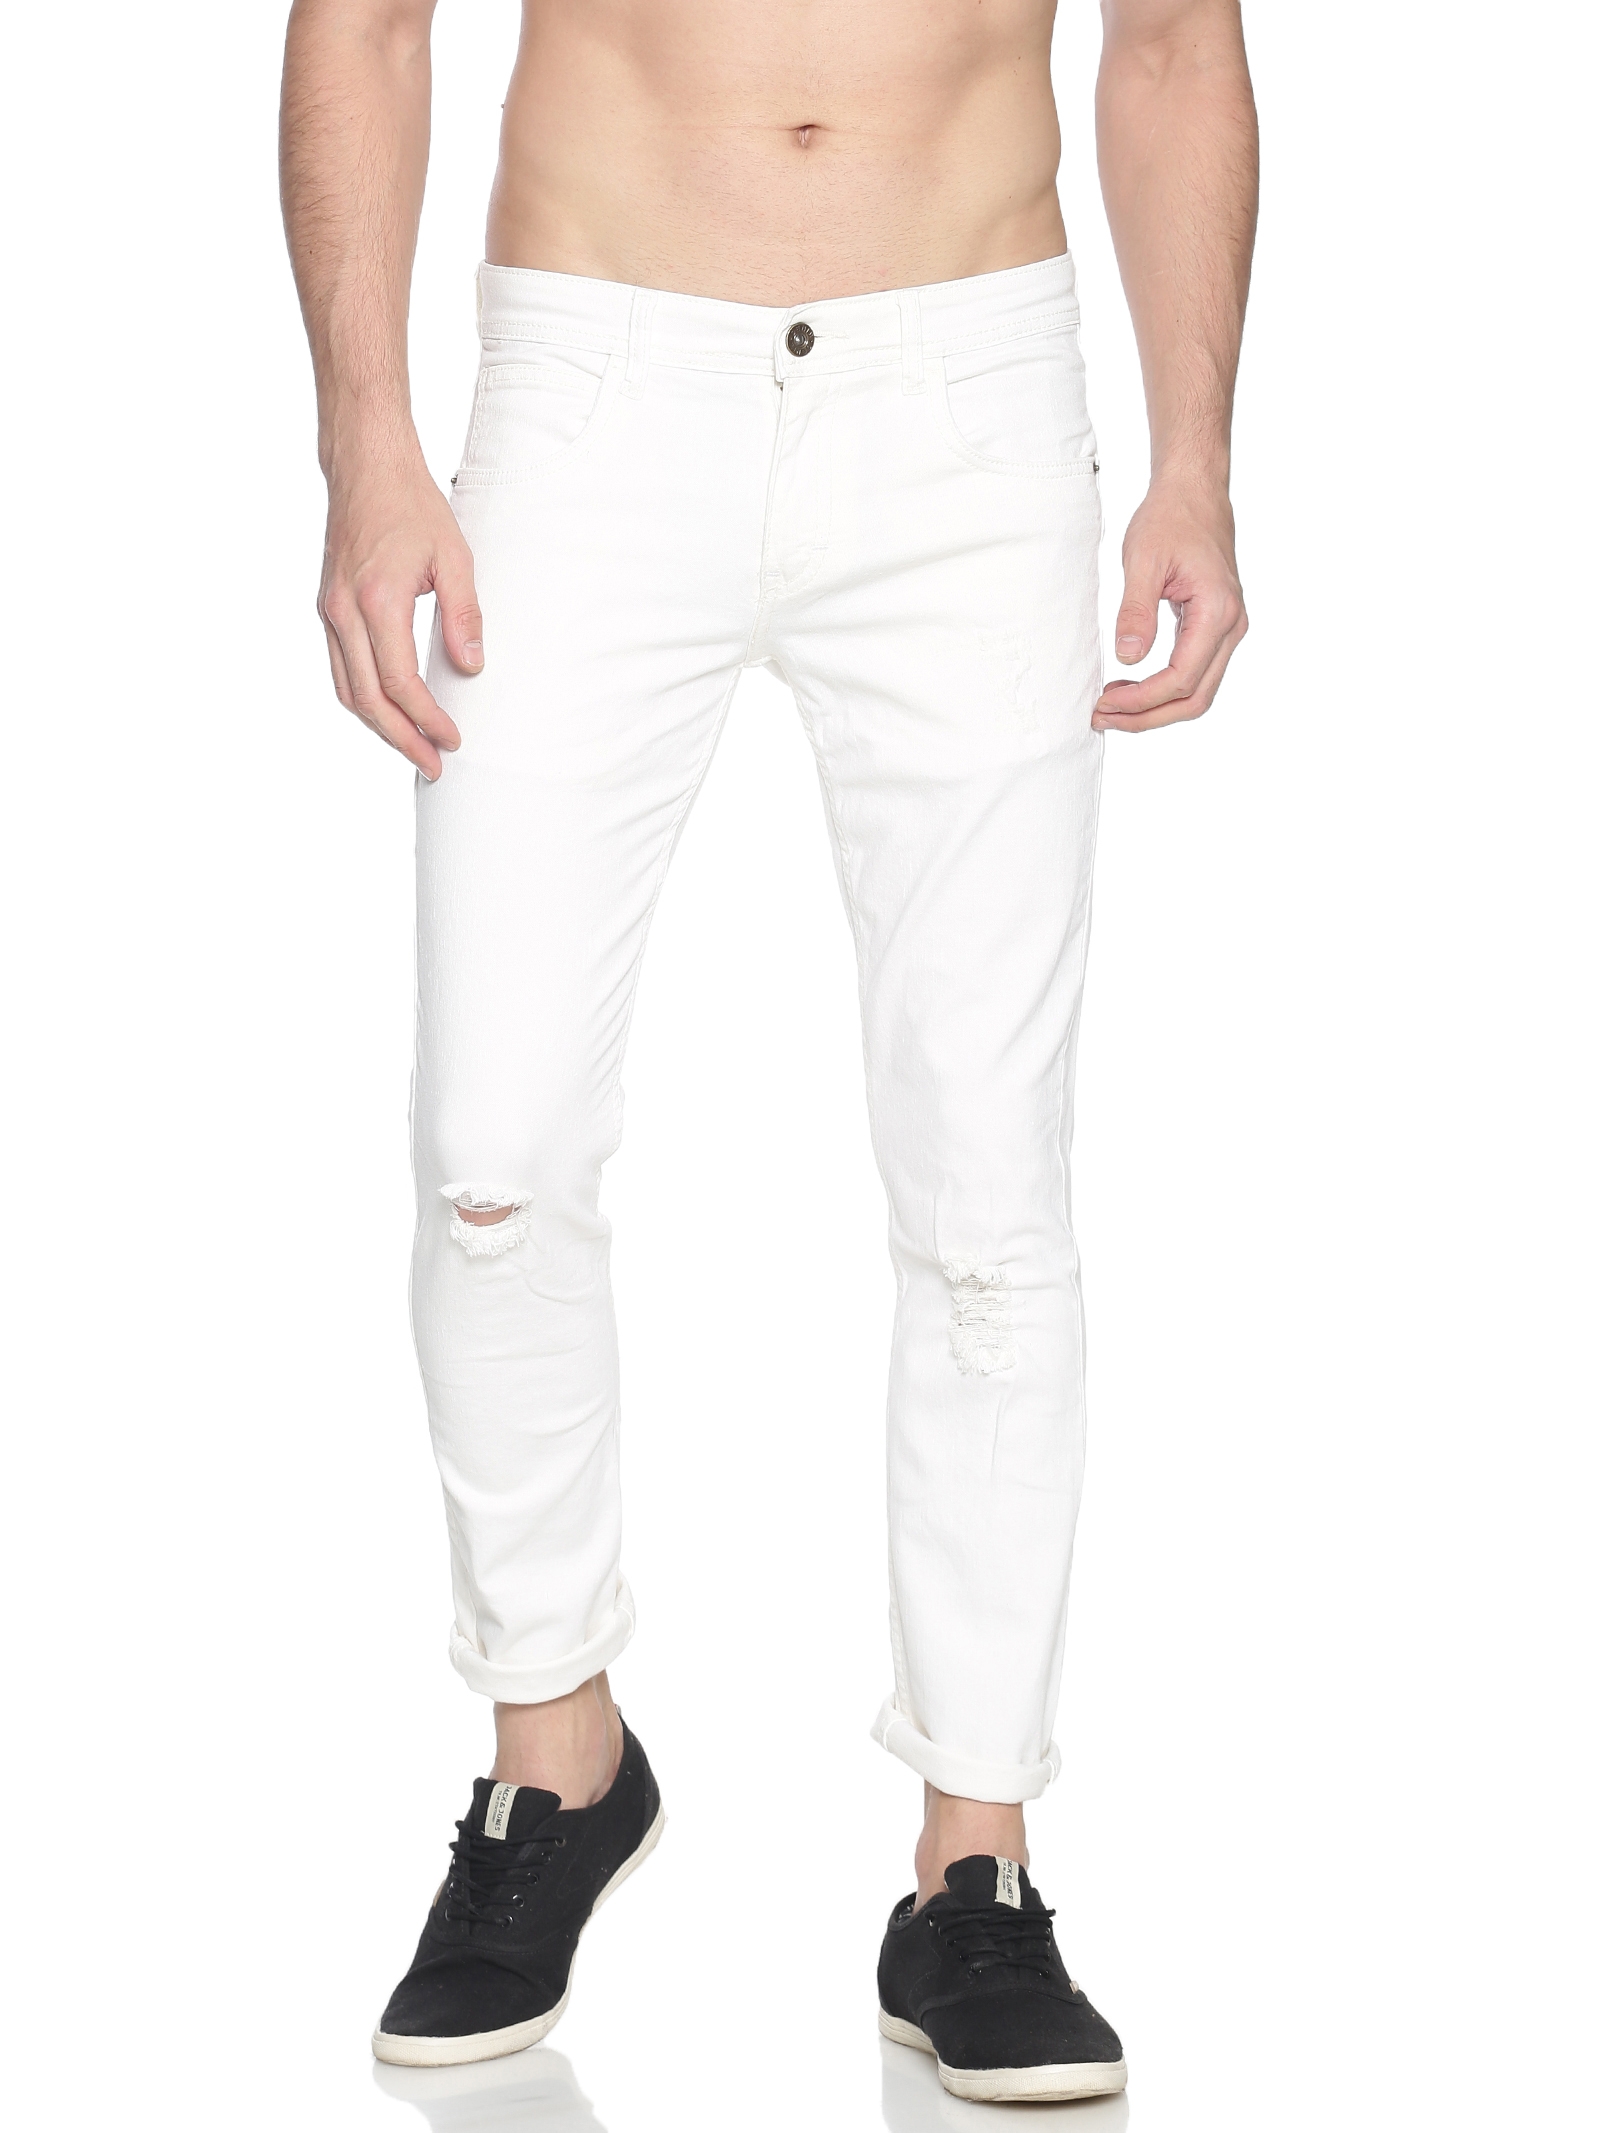 Chennis | Chennis Men's Casual Torn Jeans, White